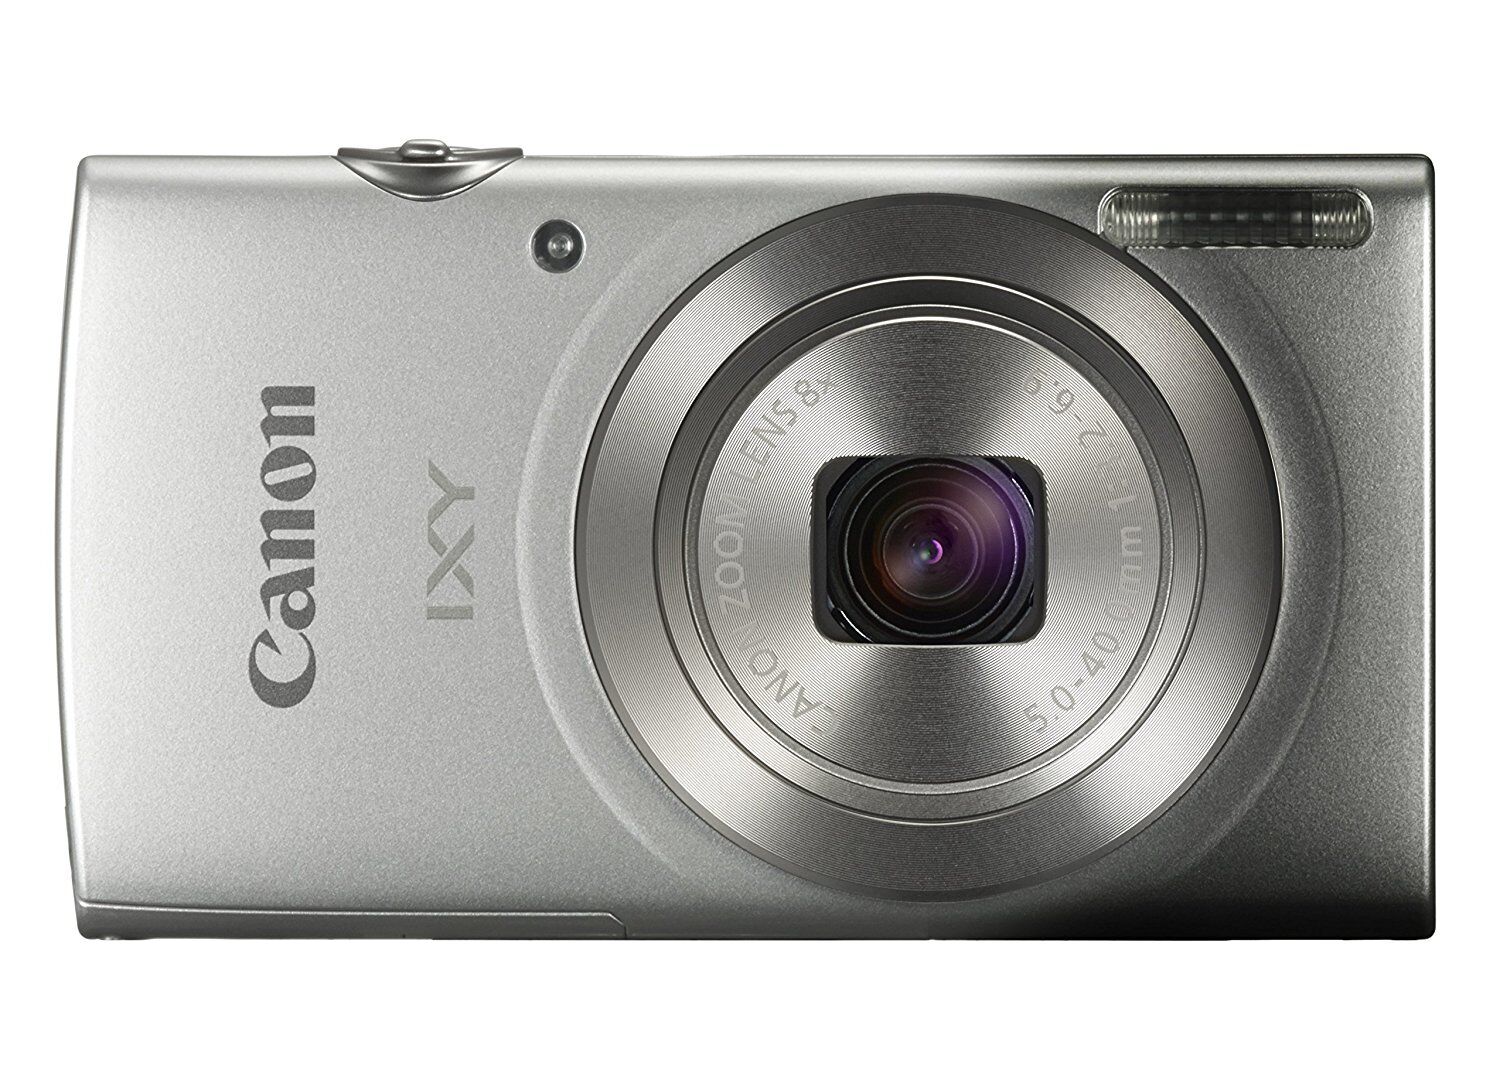 Is The Digital Camera A Type Of Input Or Output Device